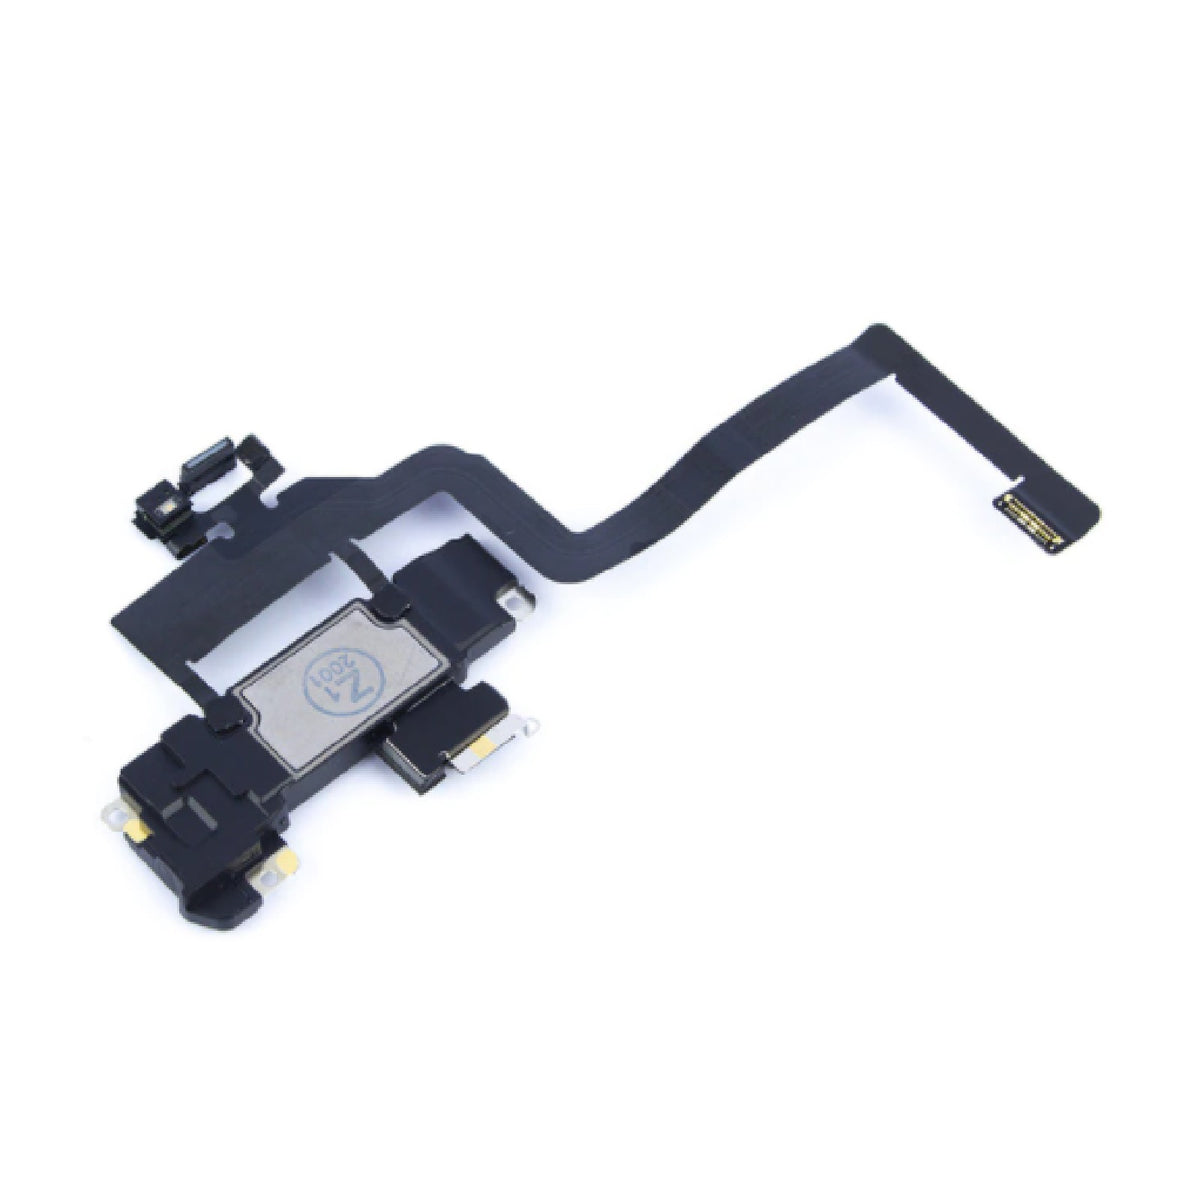  MEEFIX Ear Speaker Module and Face ID Sensor Proximity Light  Flex Cable Assembly Replacement for iPhone 11 Pro Max (6.5 inch) : Cell  Phones & Accessories